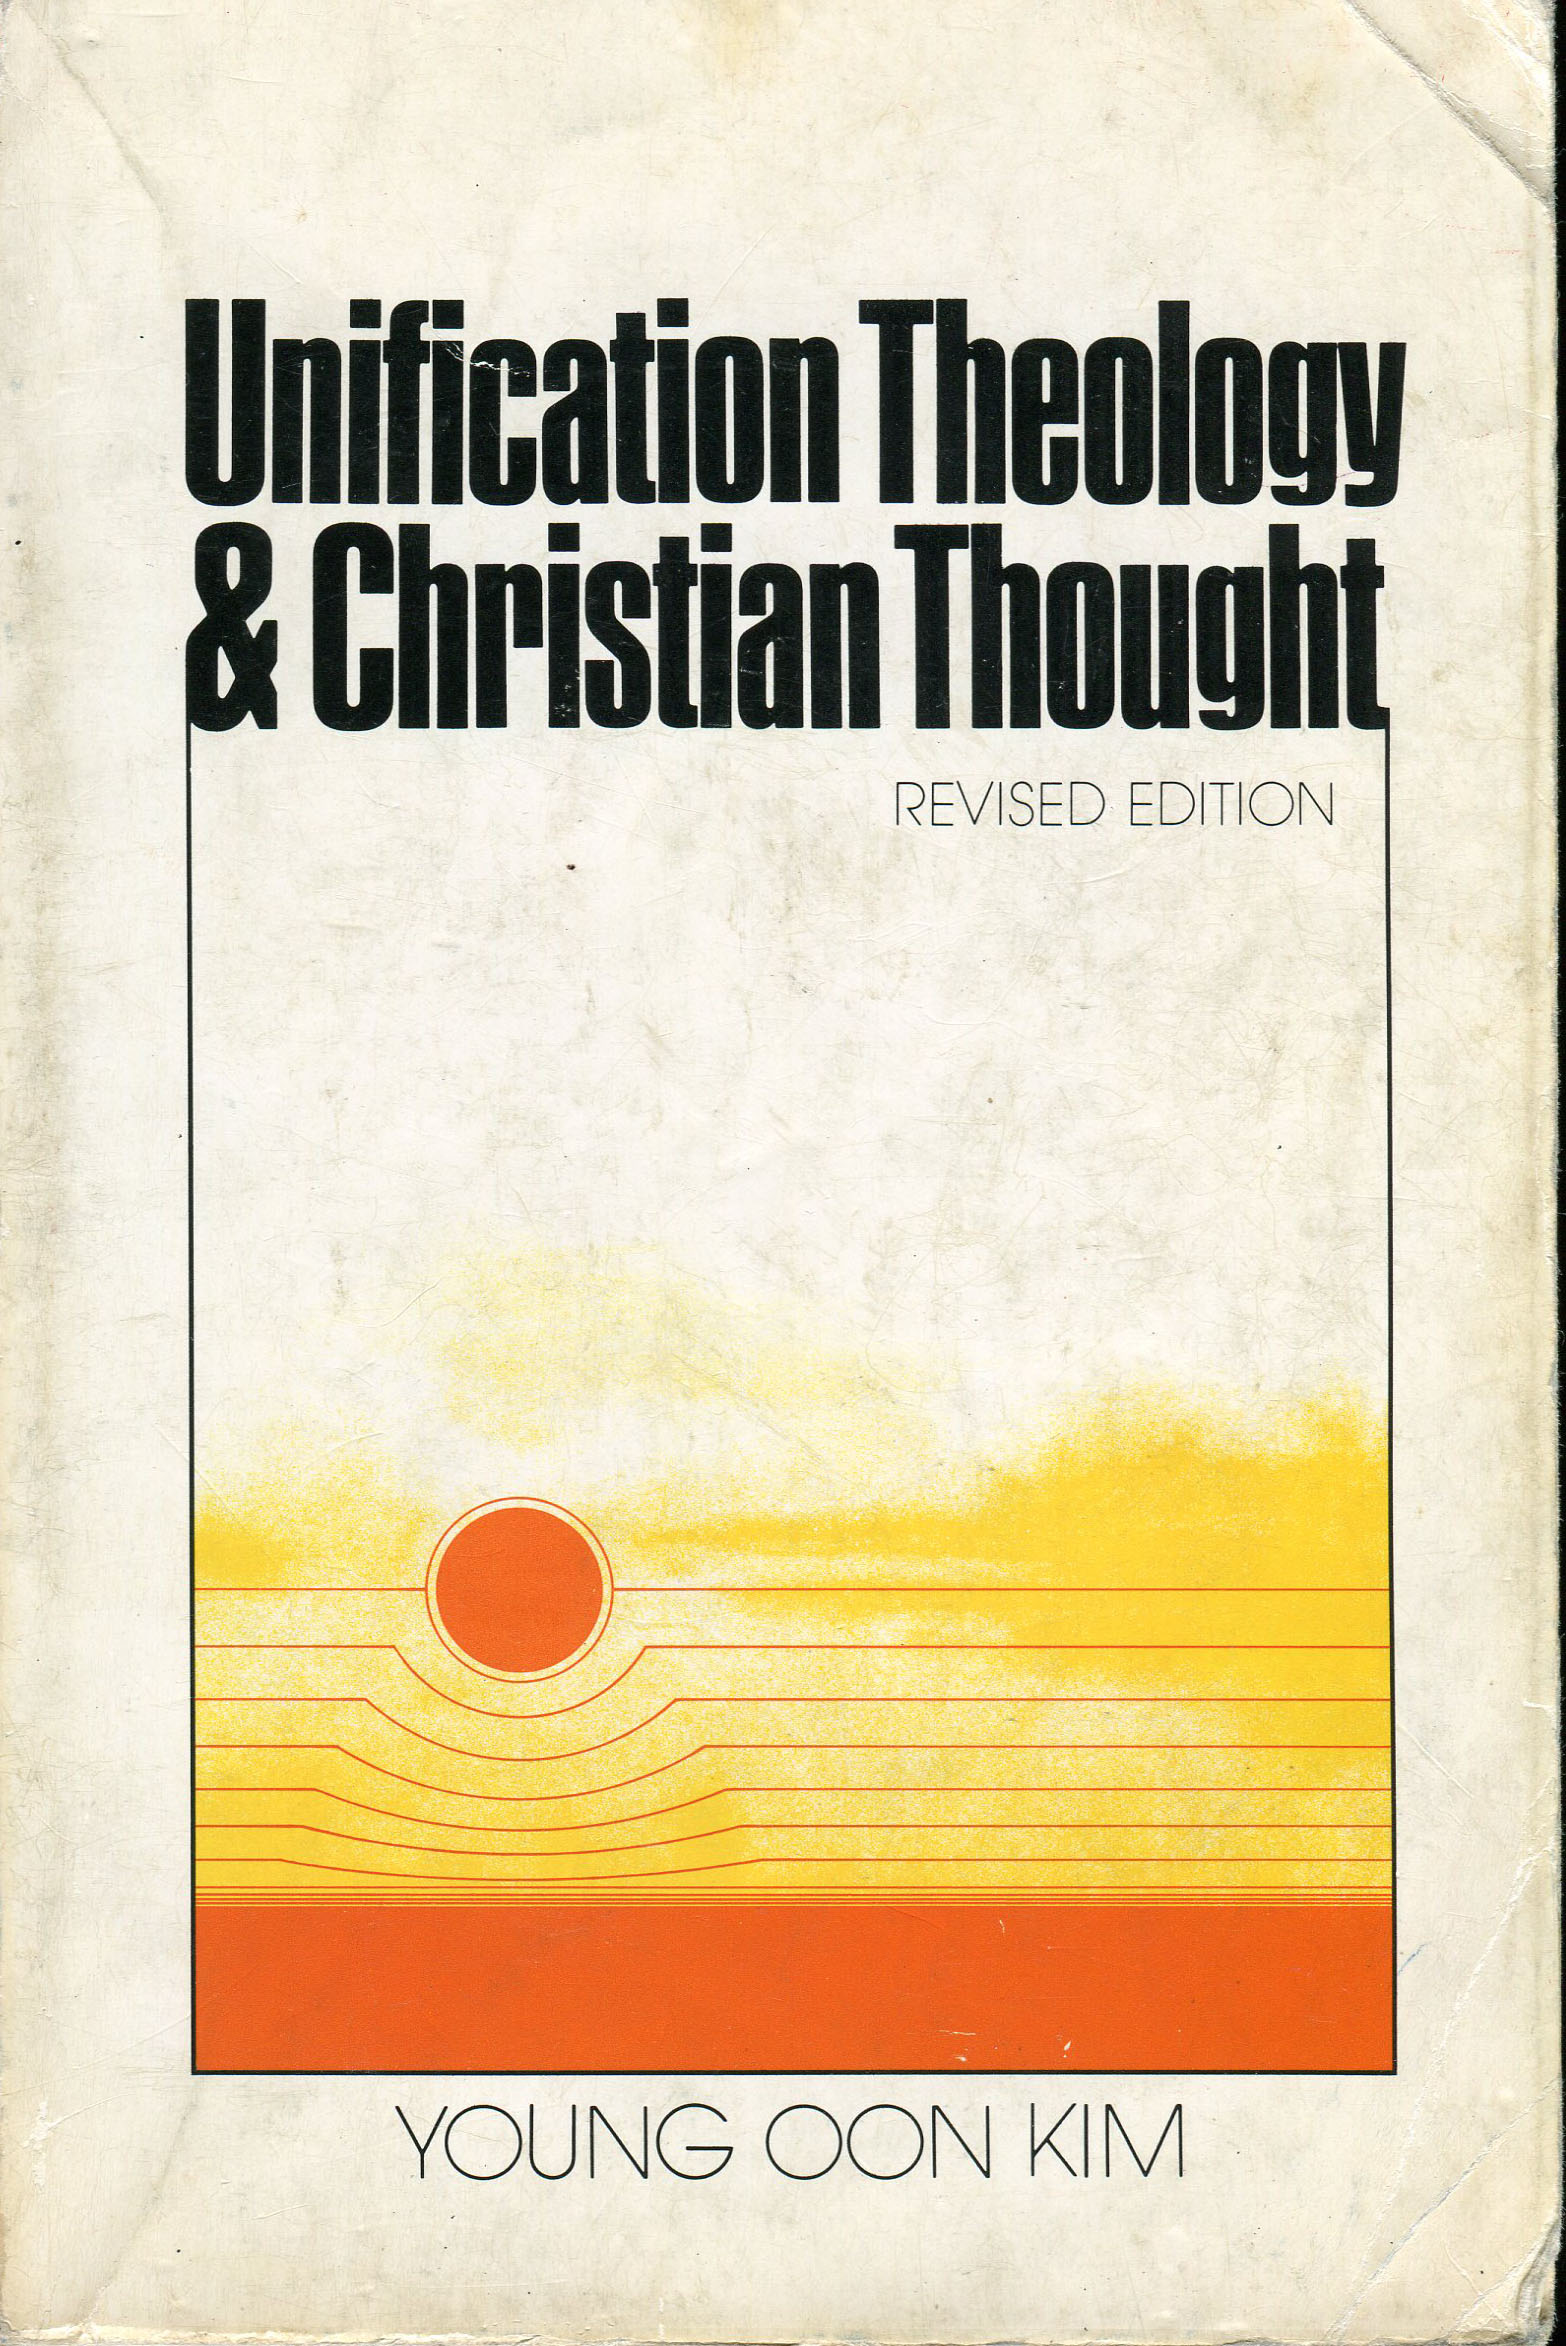 Unification Theology & Christian Thought